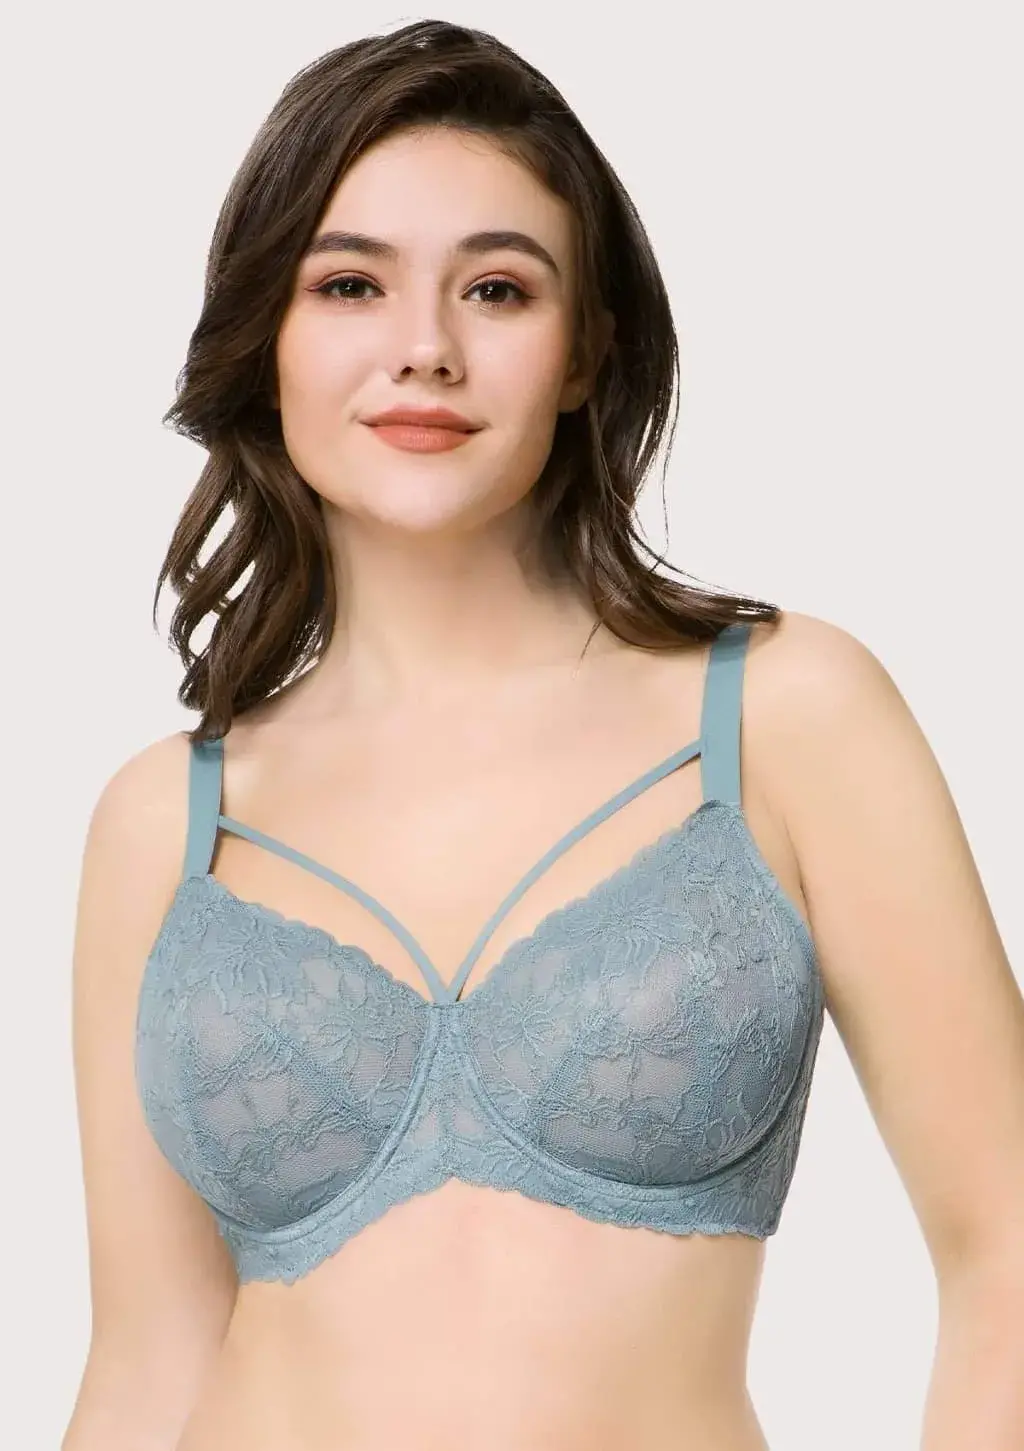 Best Bra Types for Large Busts